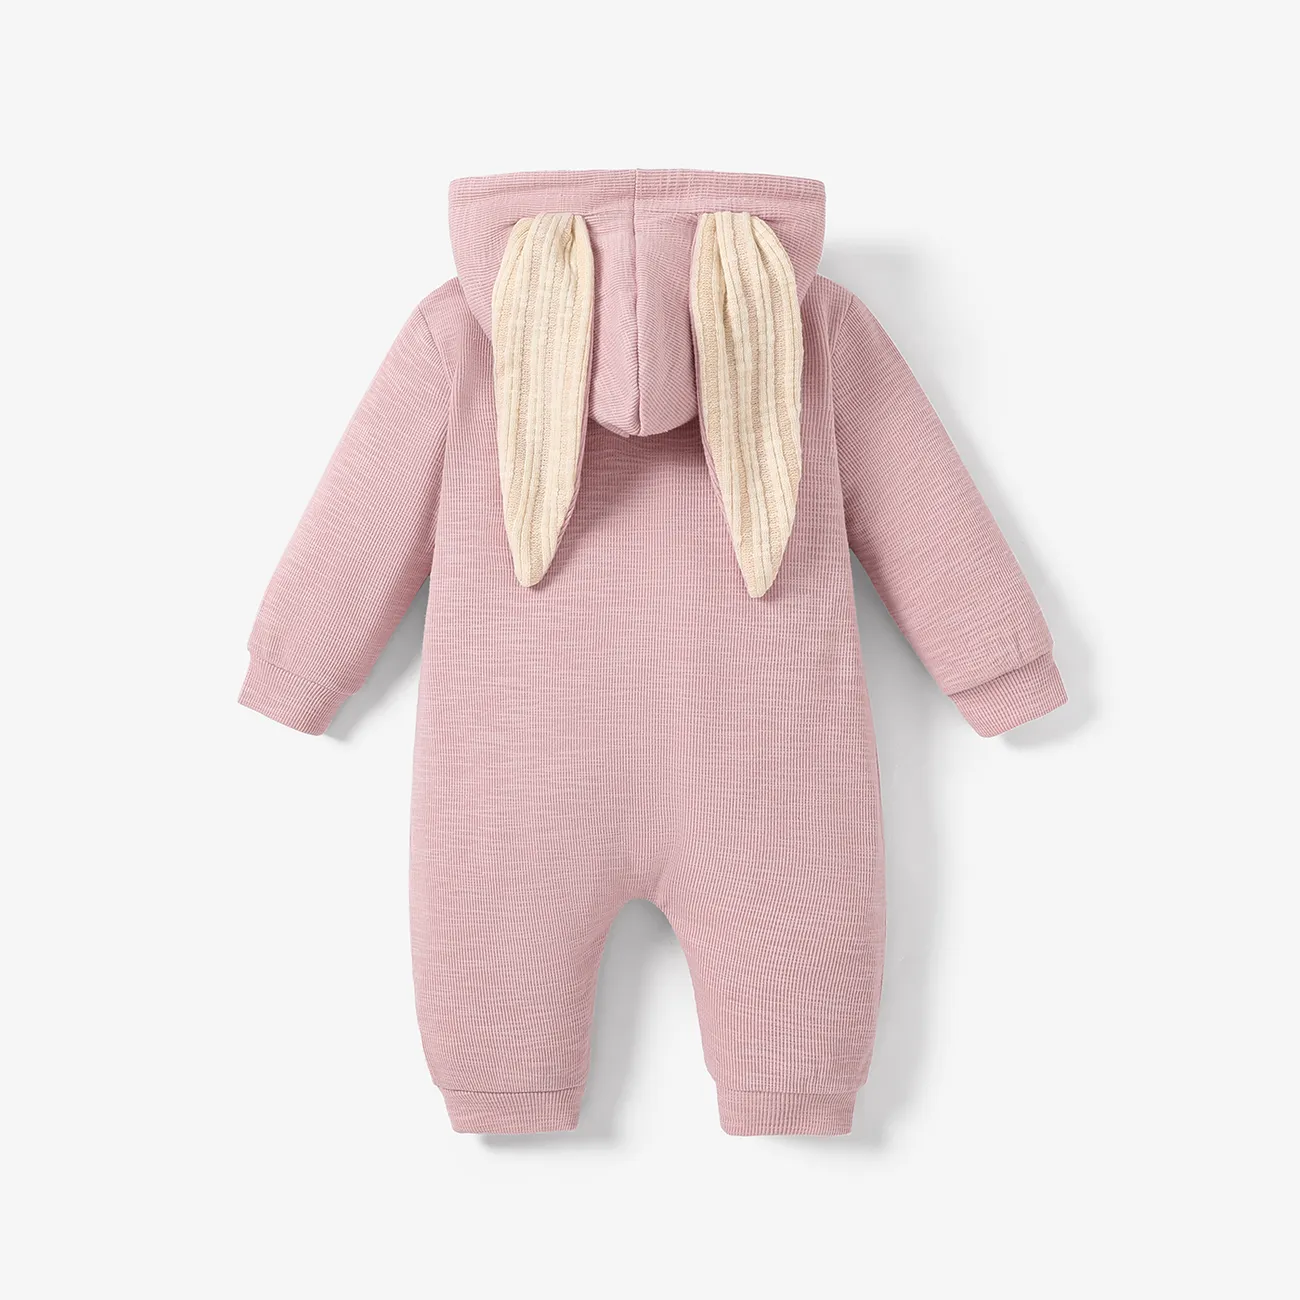 Solid Hooded 3D Bunny Ear Decor Long-sleeve White or Pink or Blue or Grey Baby Jumpsuit Pink big image 1